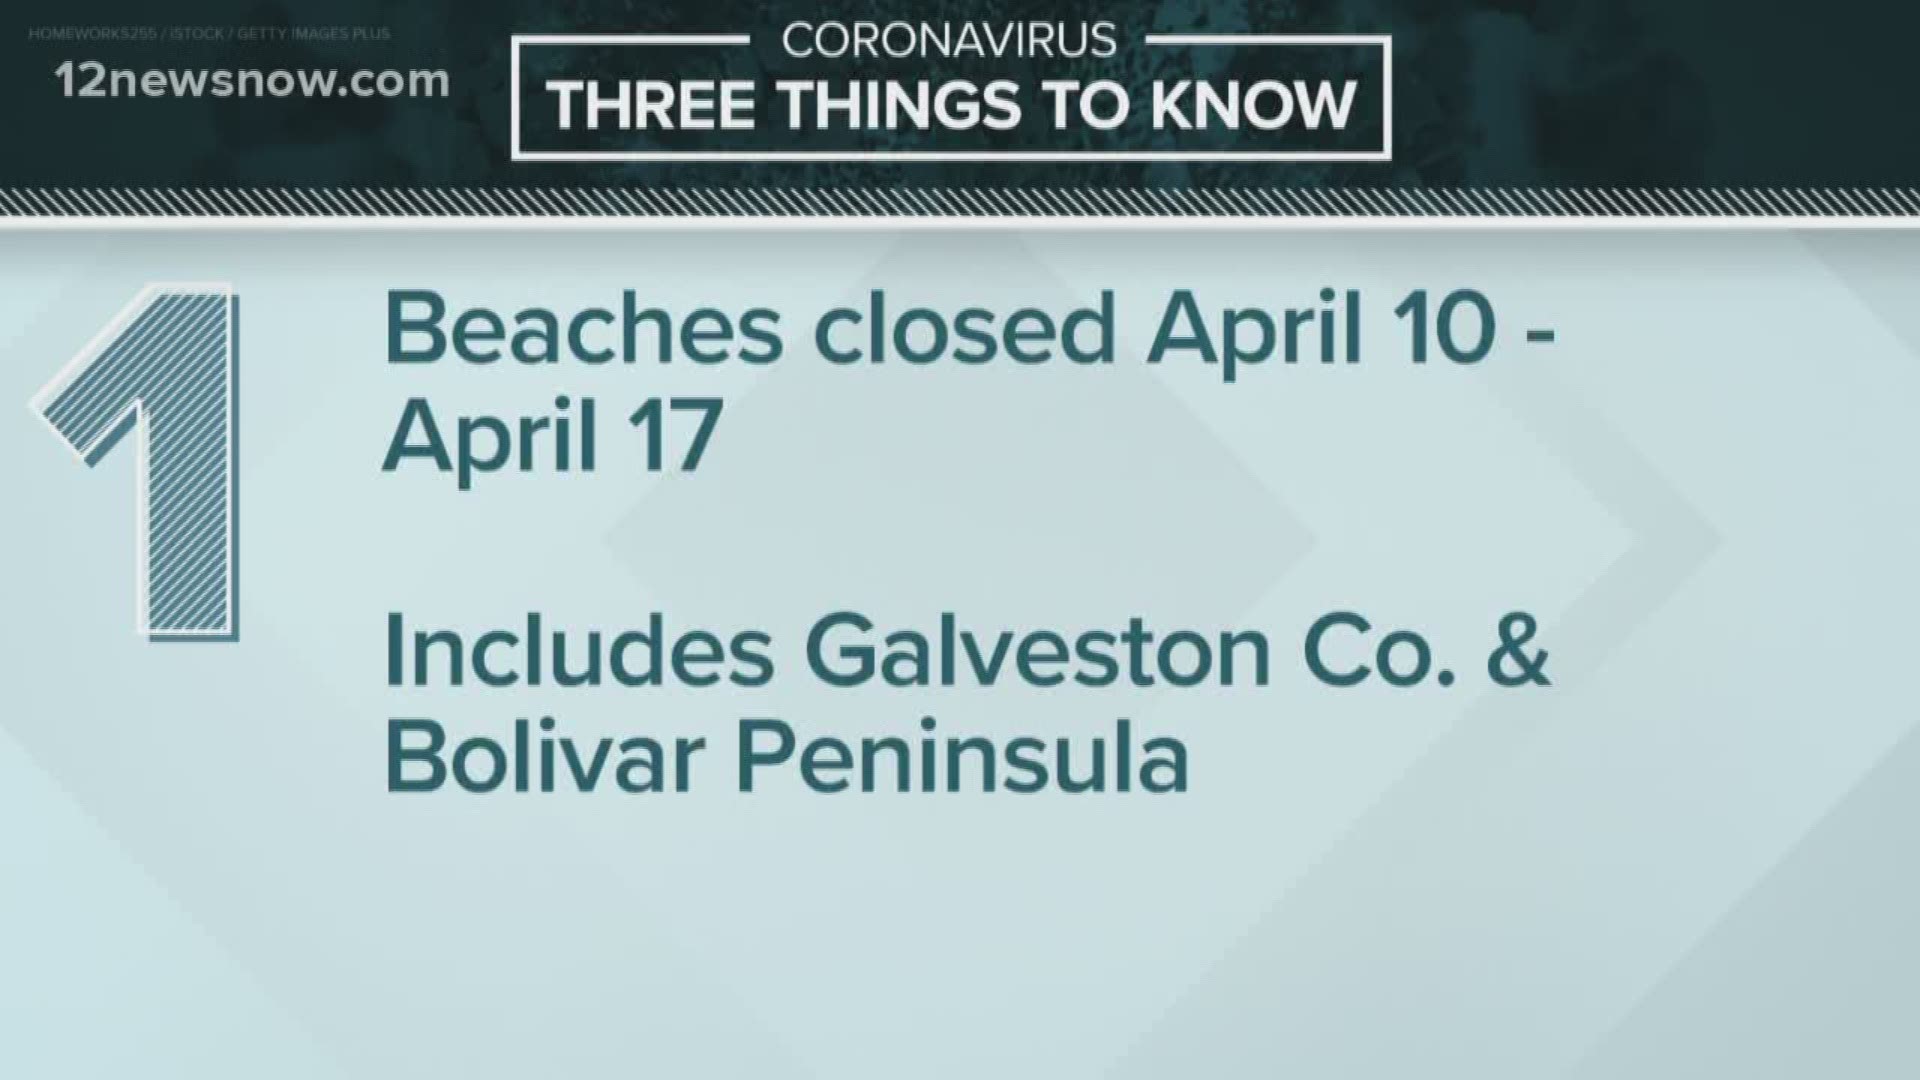 Beaches in Galveston County are closed from April 10-17